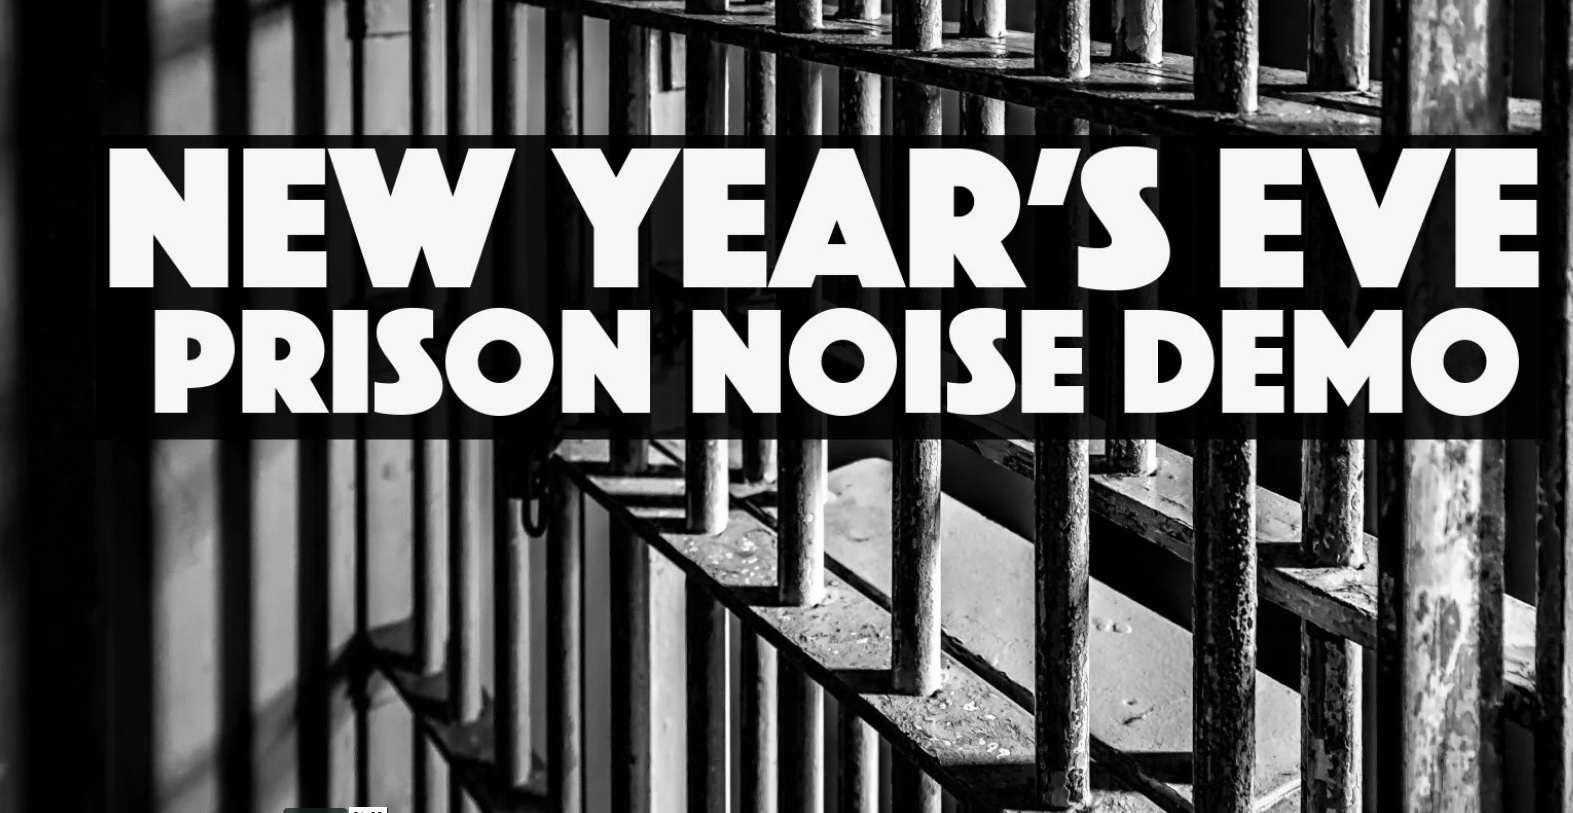 New Year’s Eve Prison Noise Demo [video]